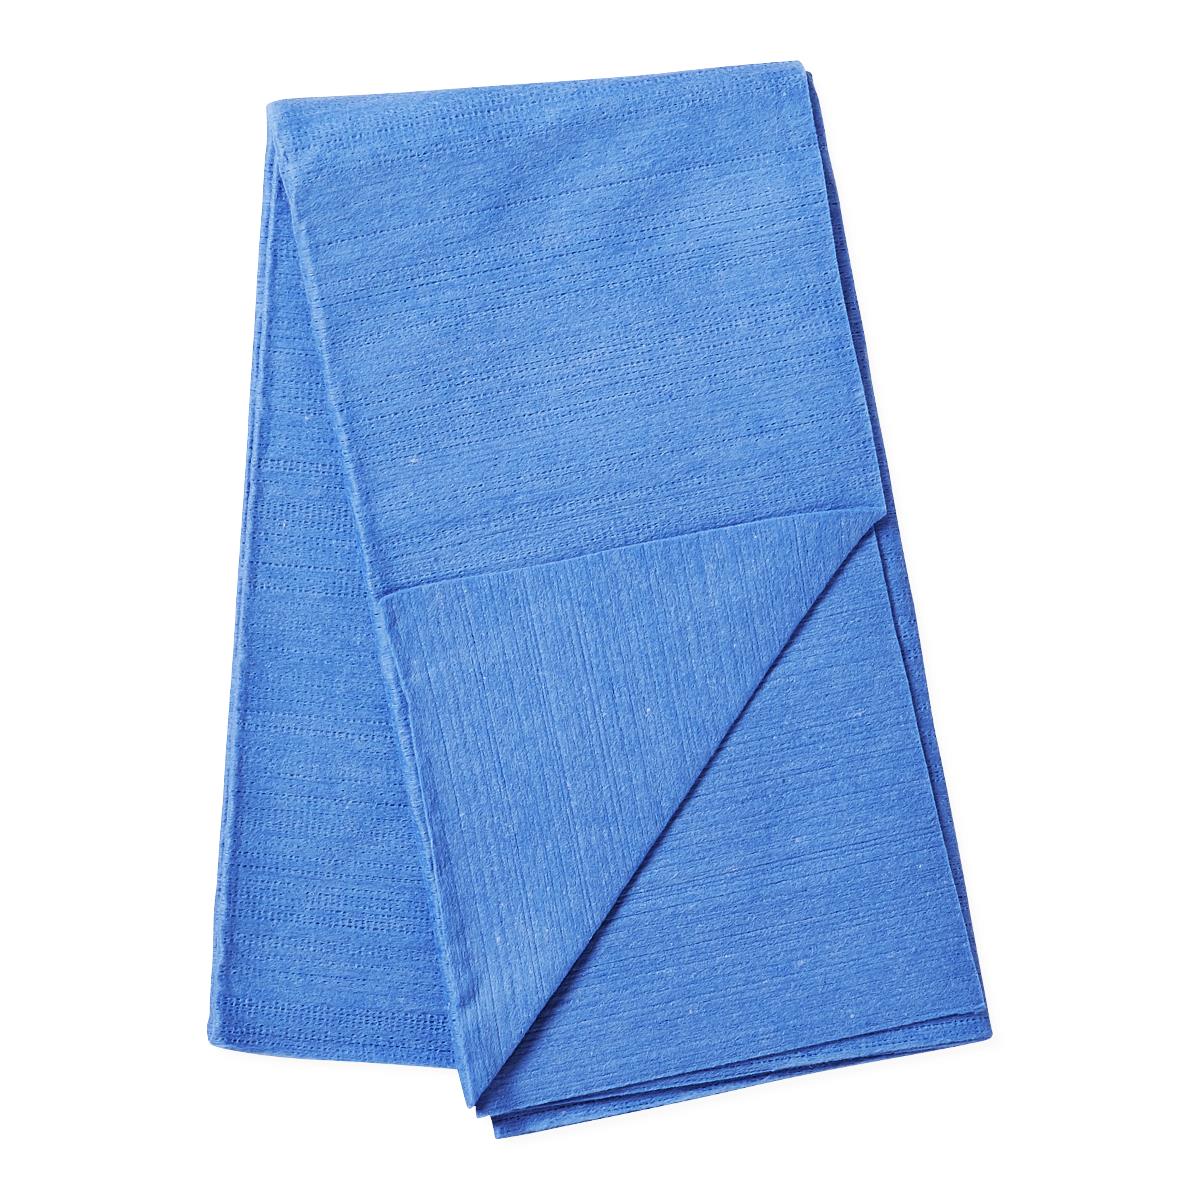 Disposable Non-Woven OR Towels,Blue Case of 80